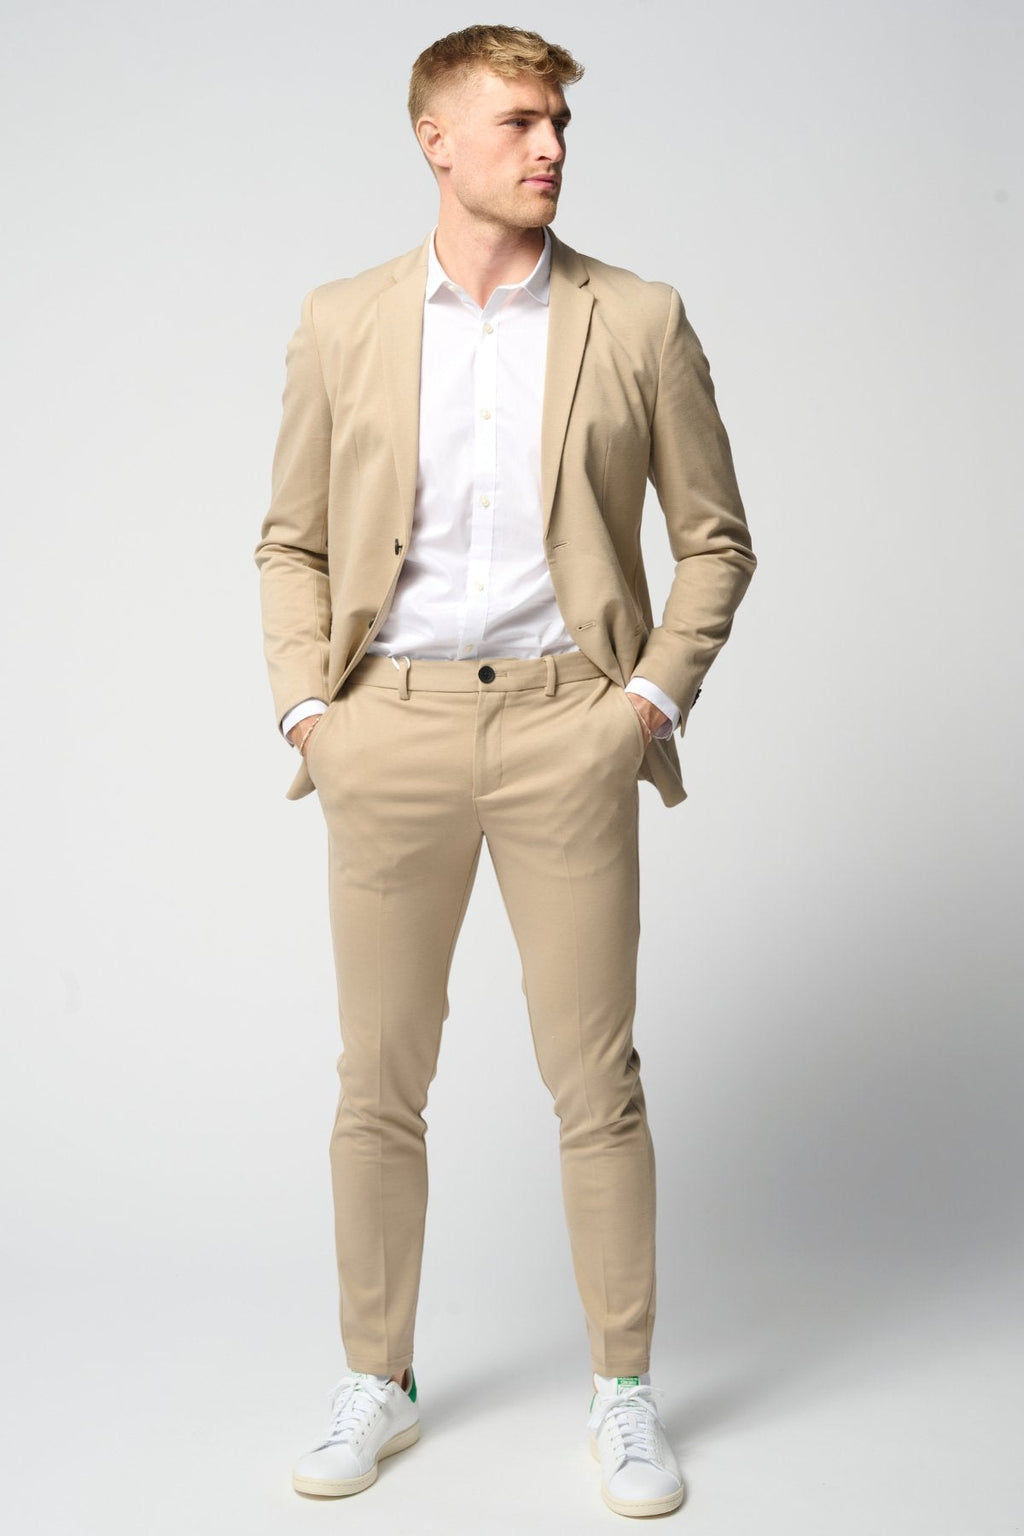 The Original Performance Suit™️ (Sand) + Shirt & Tie - Package Deal (V.I.P)